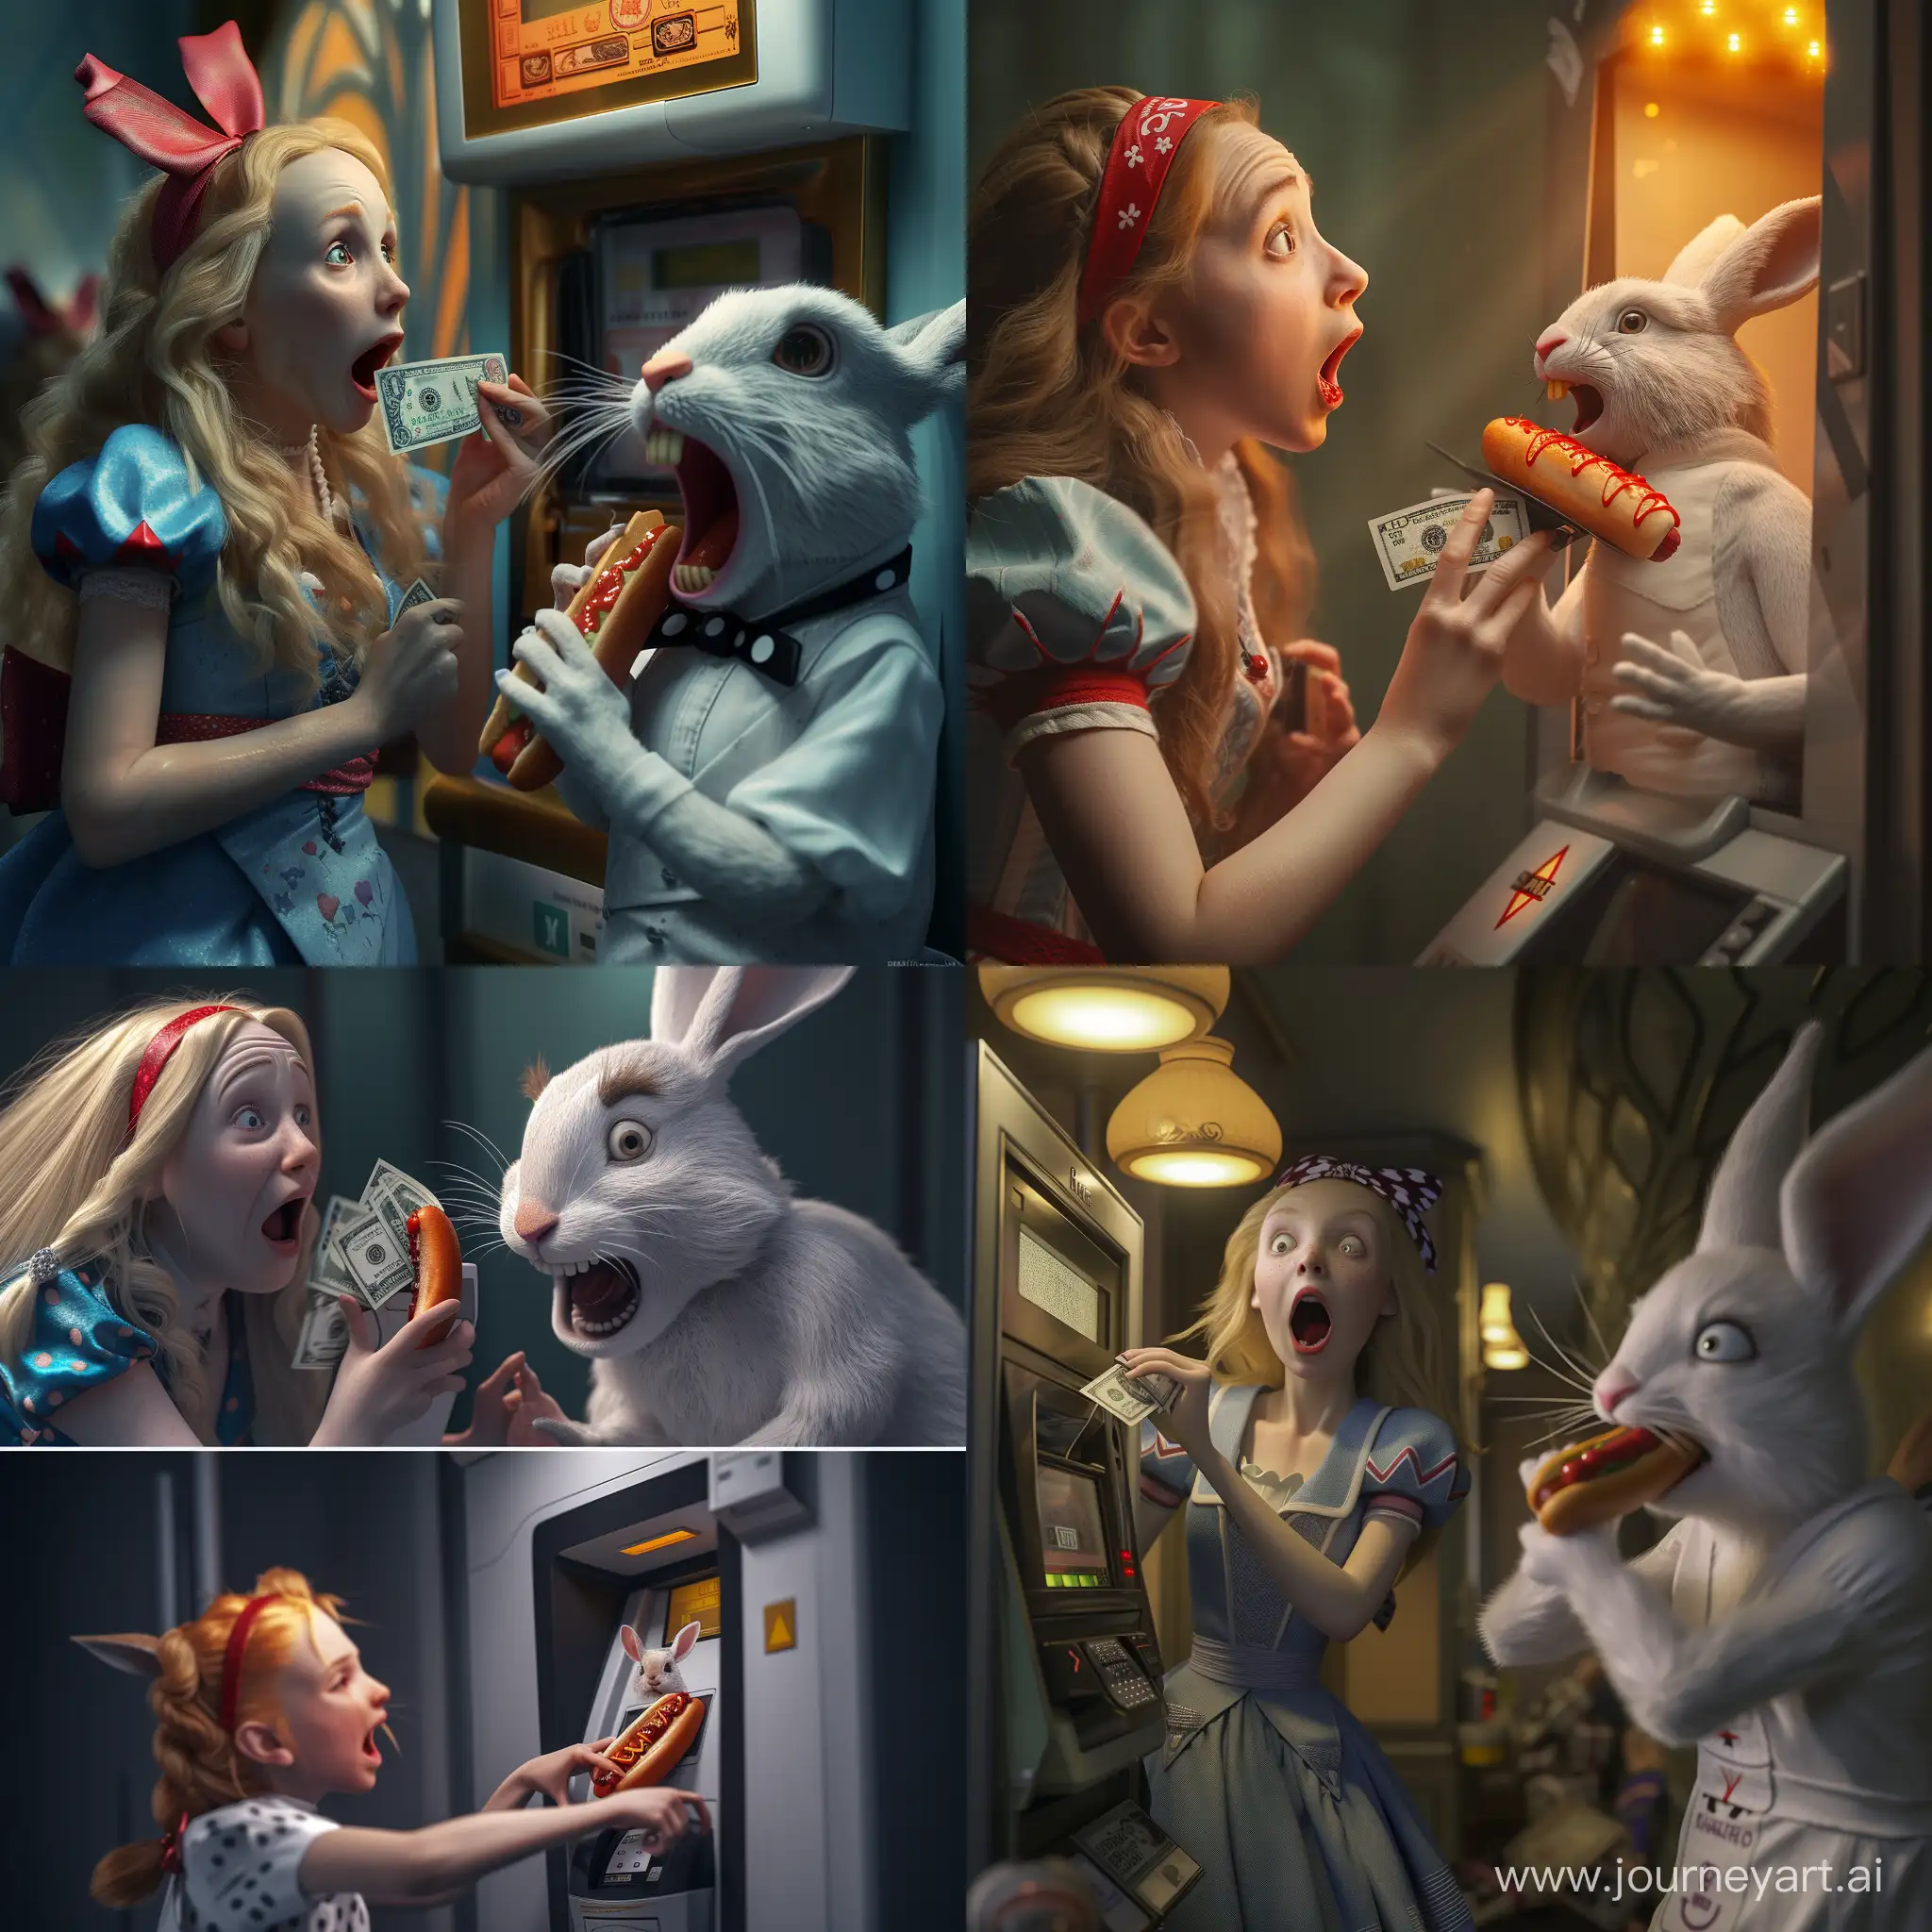 Realistic photo, top left view, secure camera style, Alice in wonderland is taking money from the ATM while she is surprised looking into the camera, close to her add the White Rabbit indulging in a hot dog while the rabbit is screaming because he got ketchup on his white shirt, photorealism, cinematic lighting, 8k